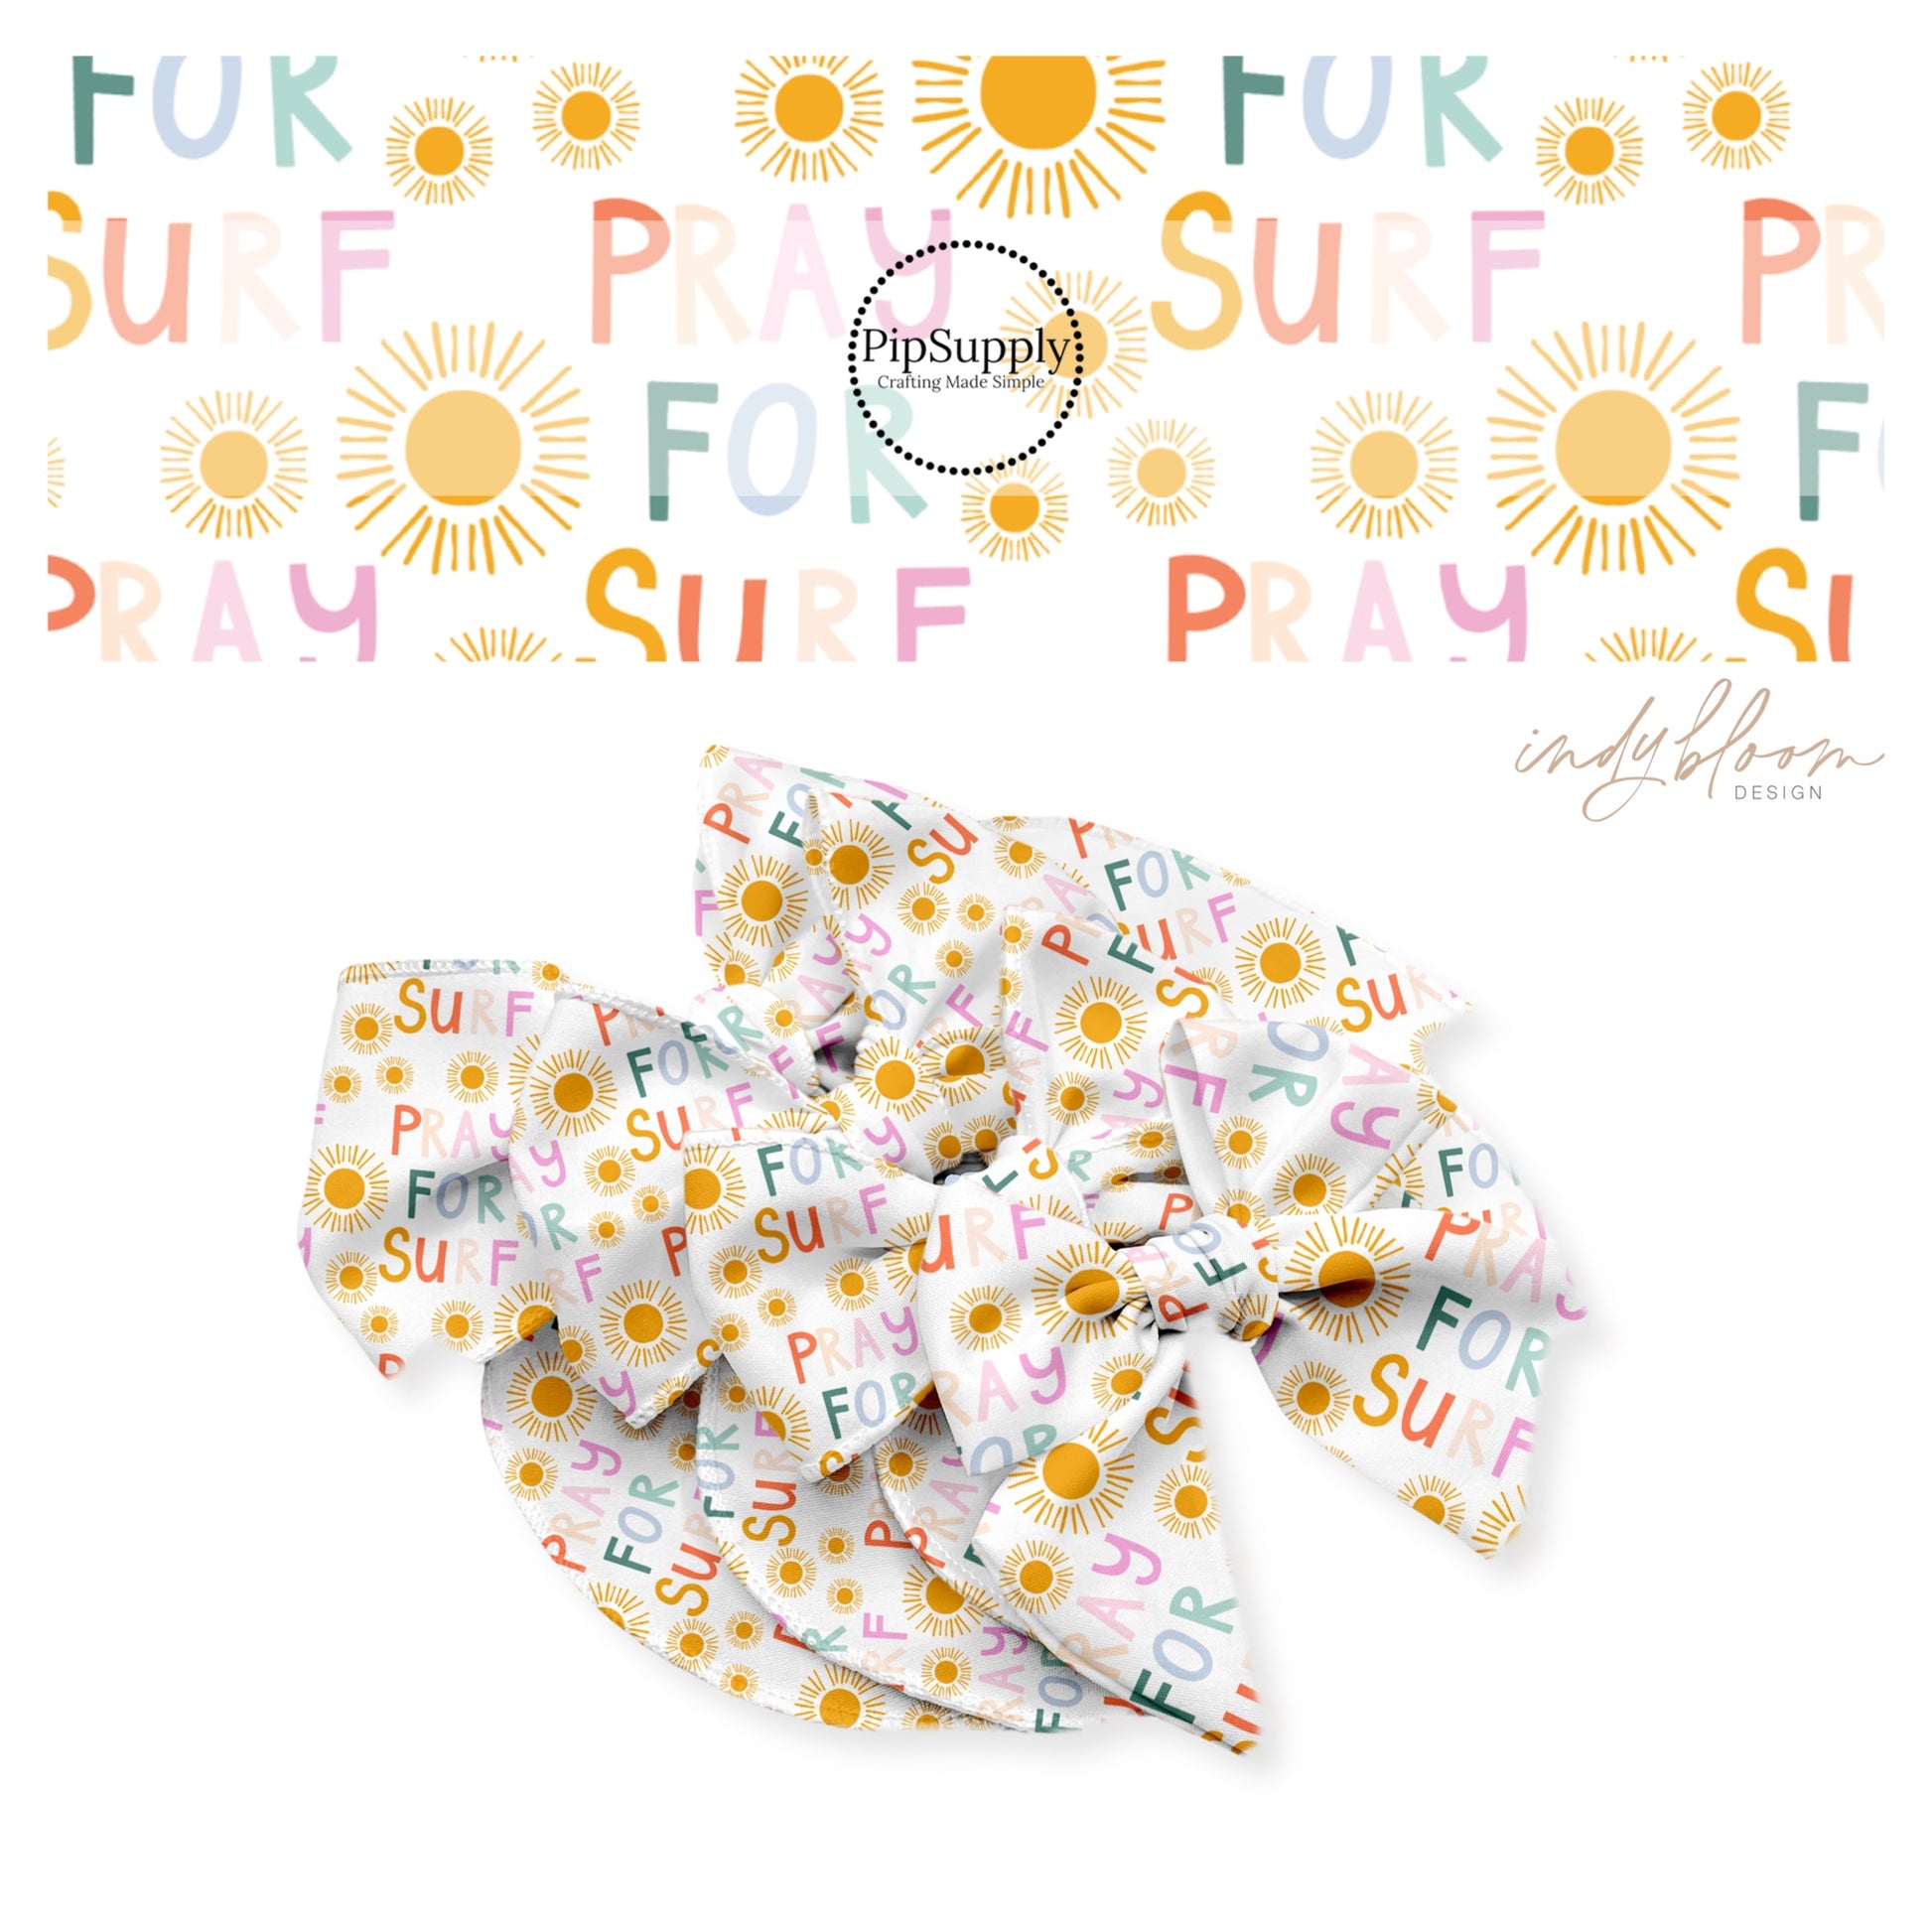 Pray for surf written in multi colors with orange sunshines on white bow strips